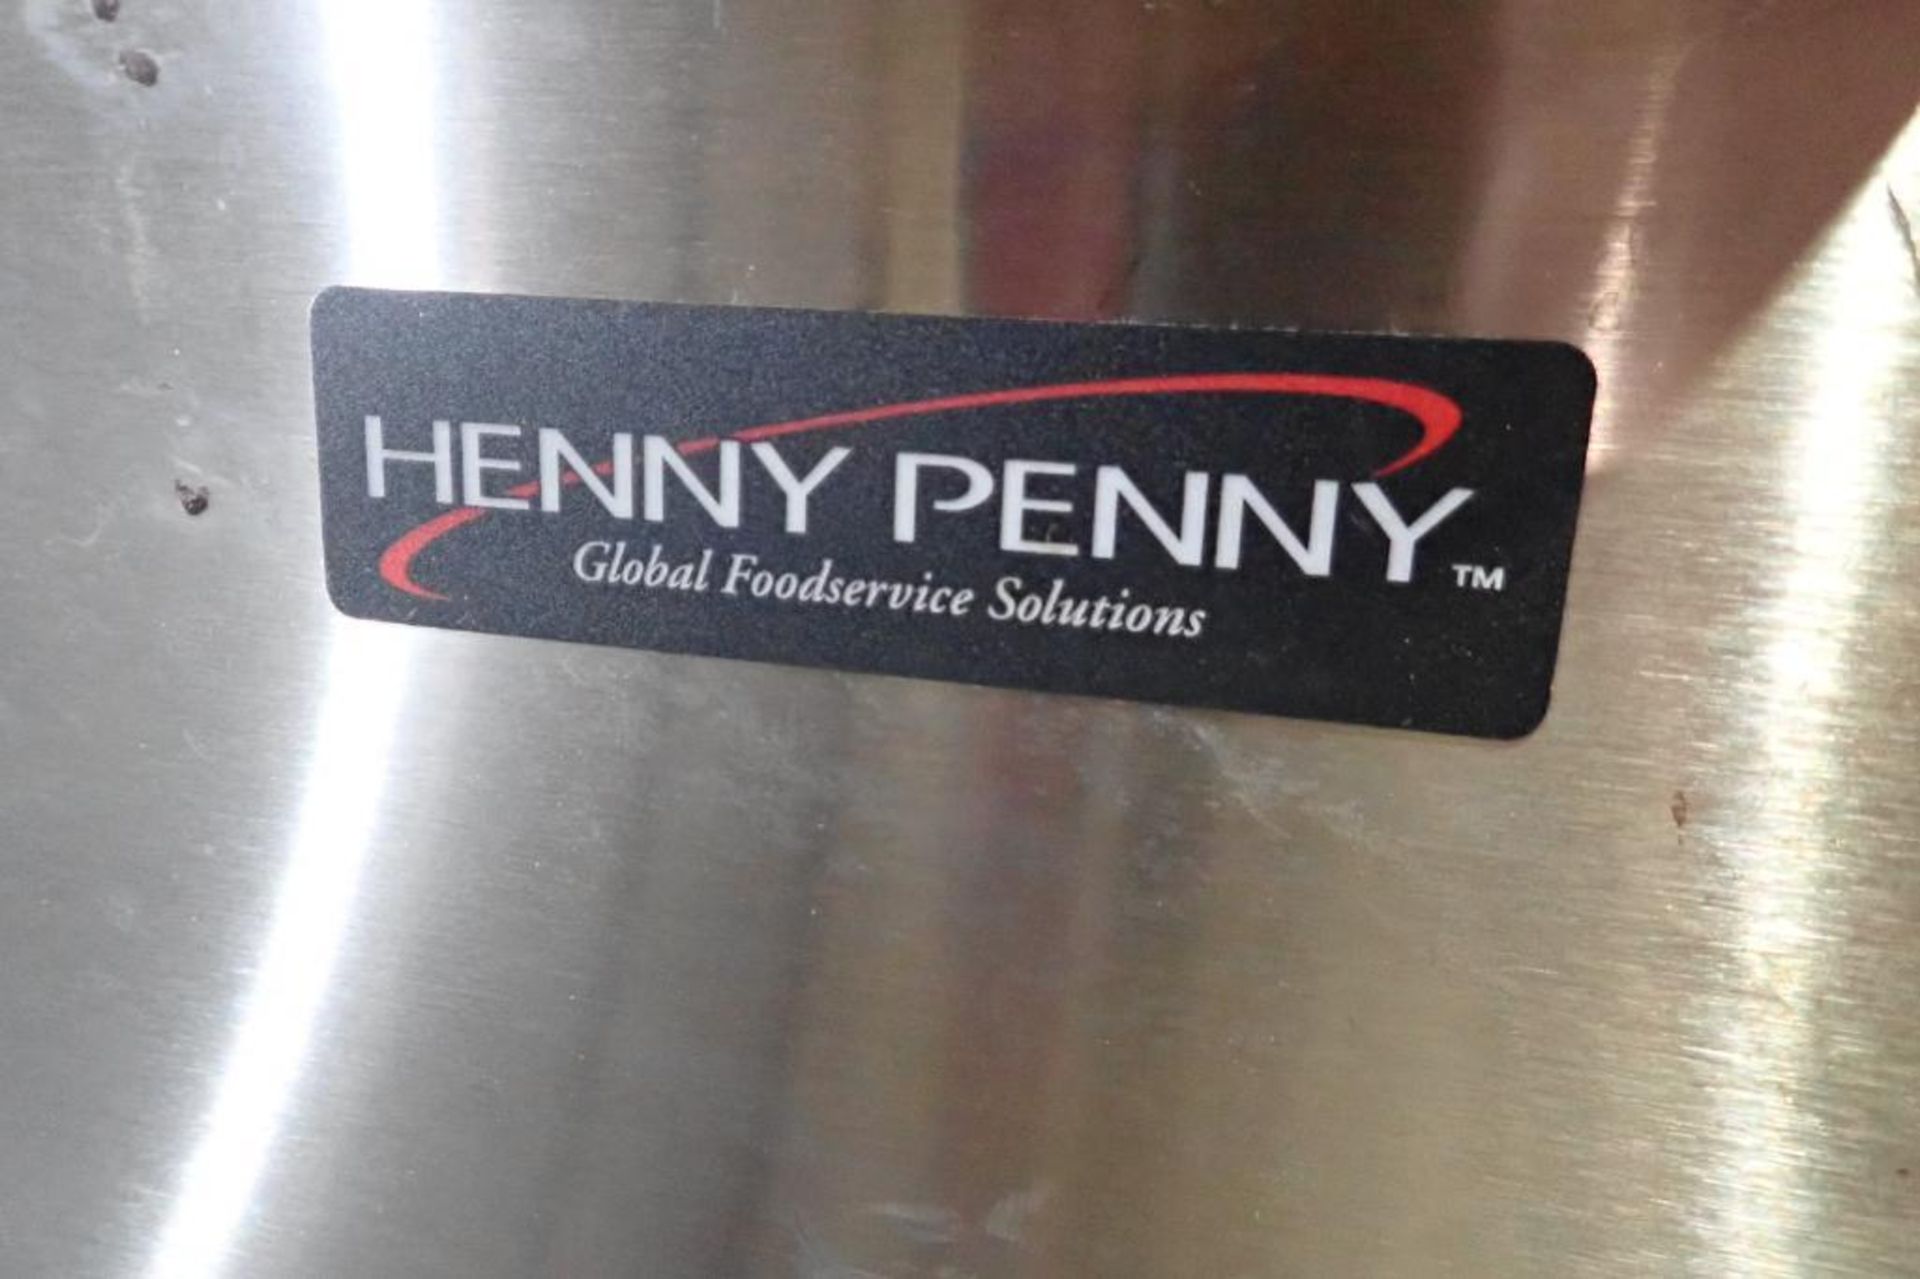 Henny Penny 4-shelf open face show case for hot foods - Image 3 of 5